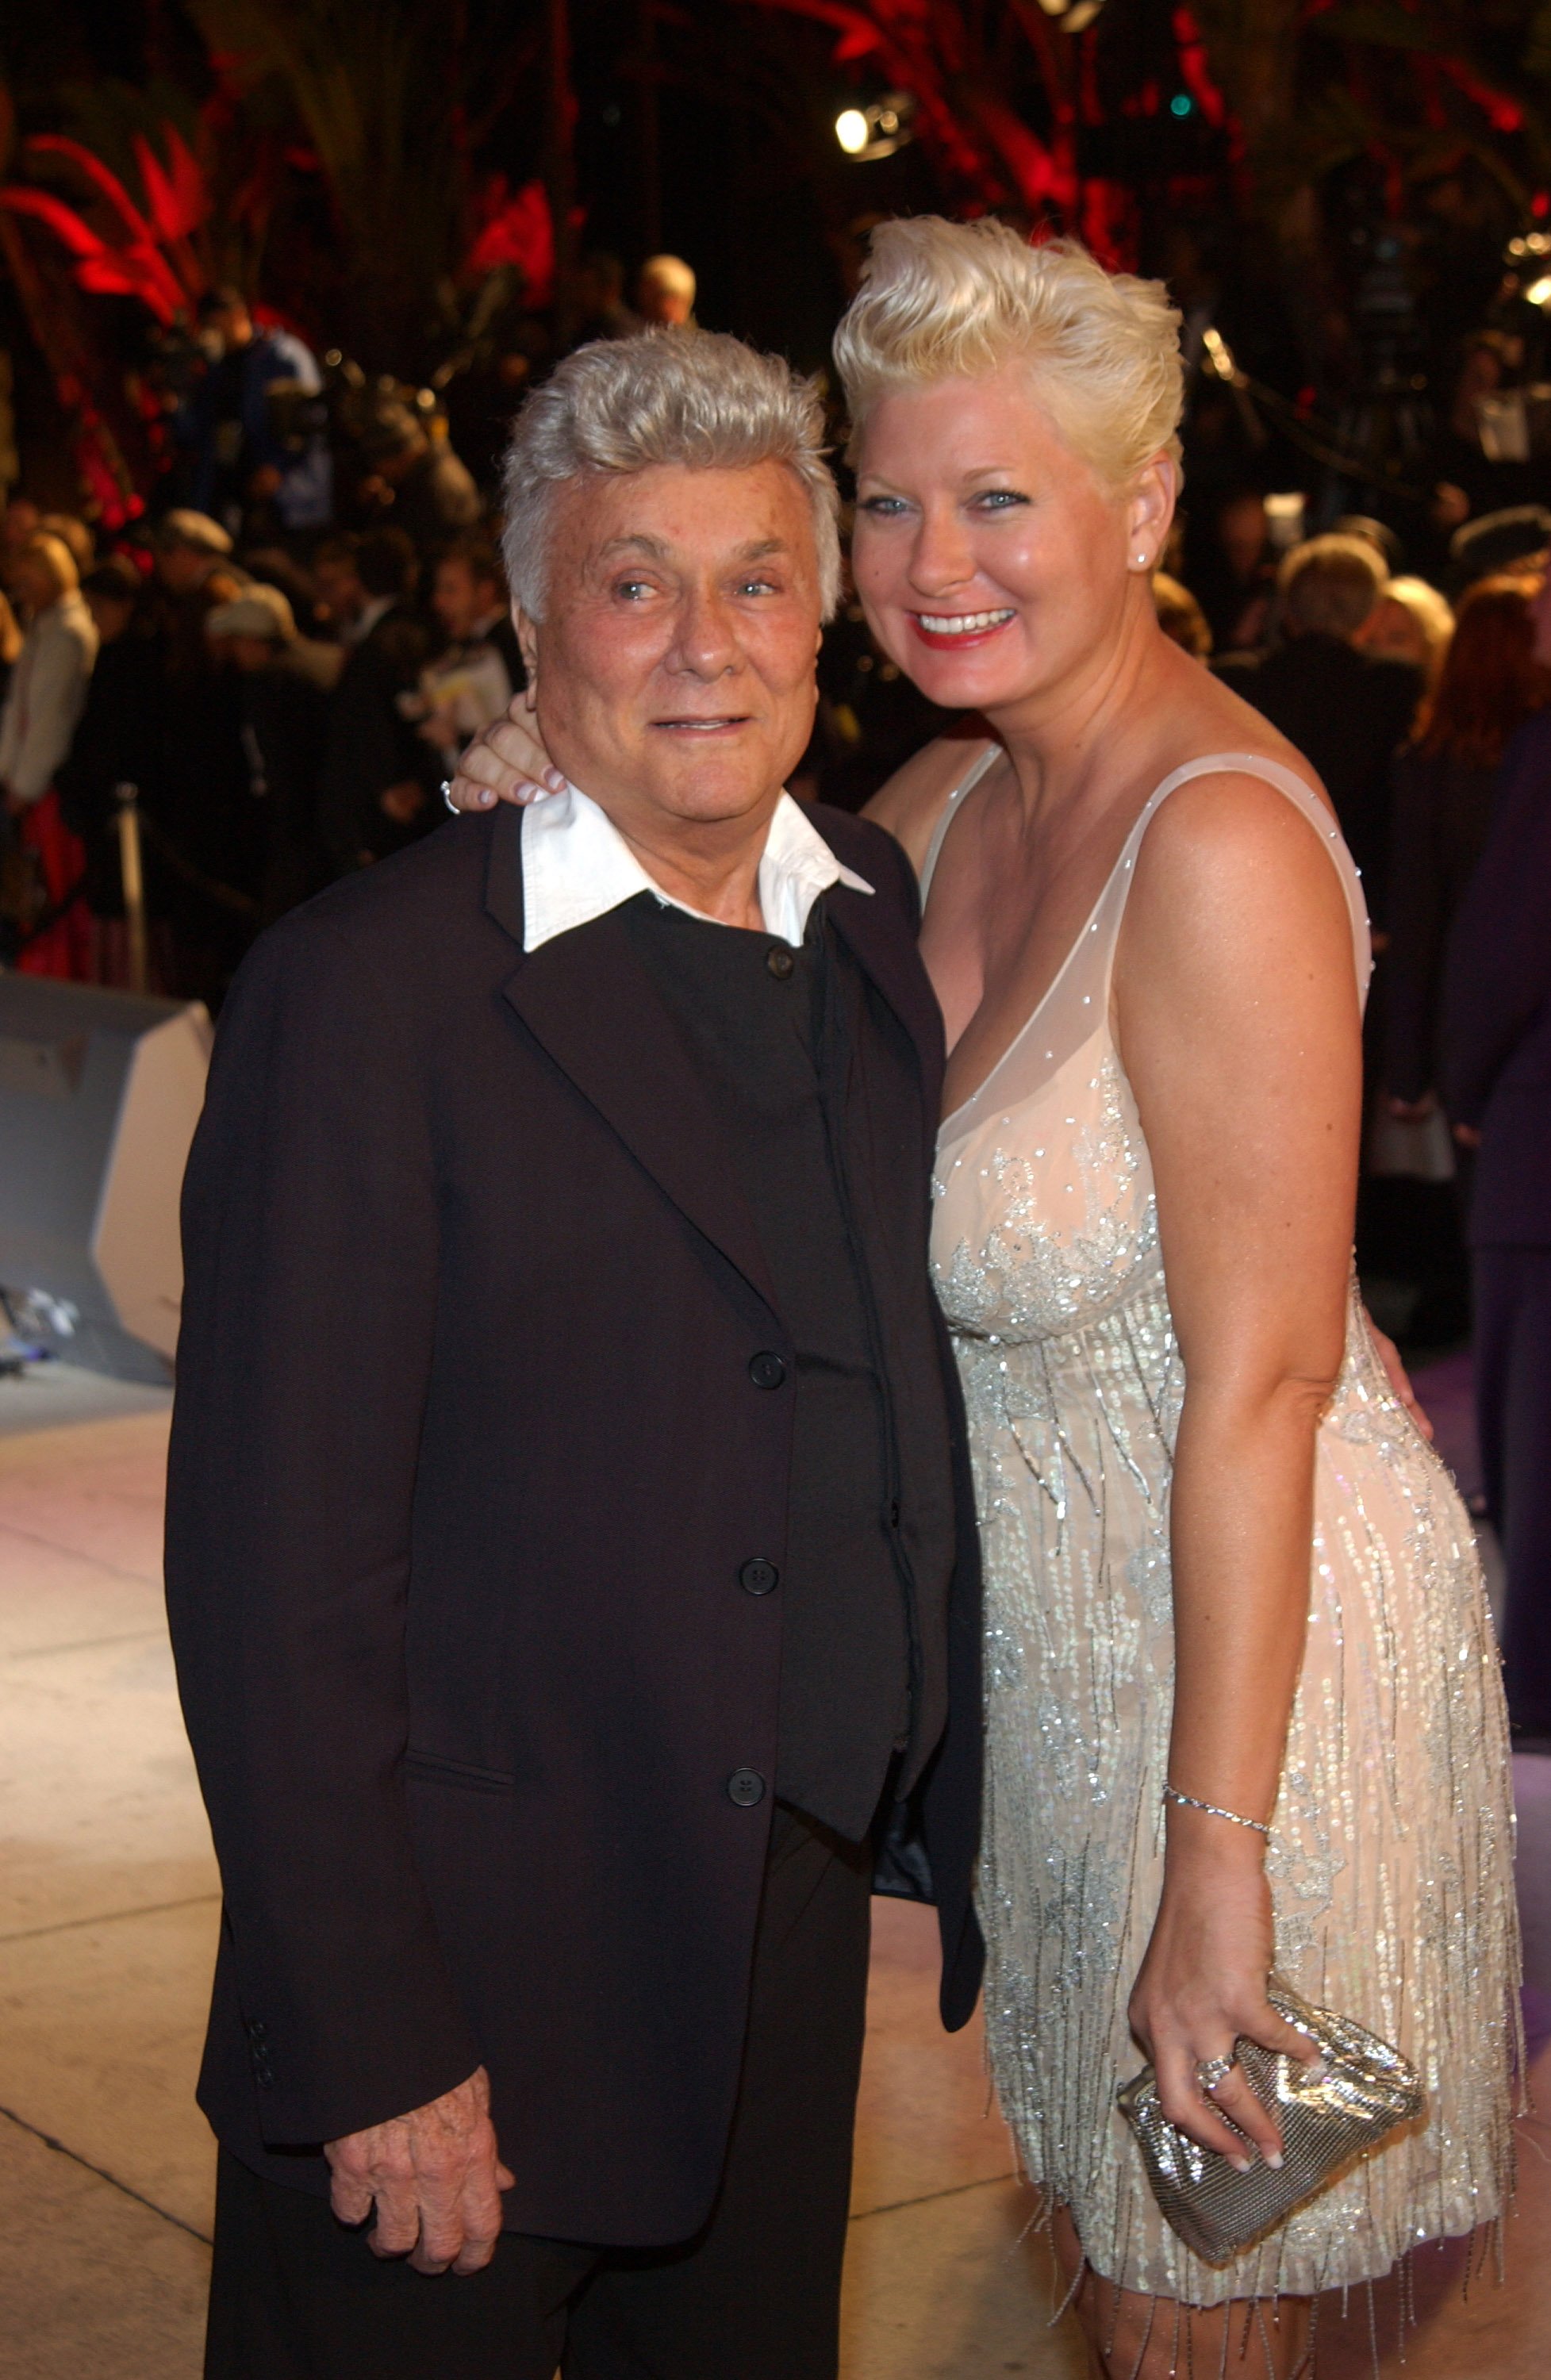 Tony Curtis and Jill Vandenberg at a Vanity Fair Oscar Party at Mortons in Beverly Hills, California on February 29, 2004 | Source: Getty Images